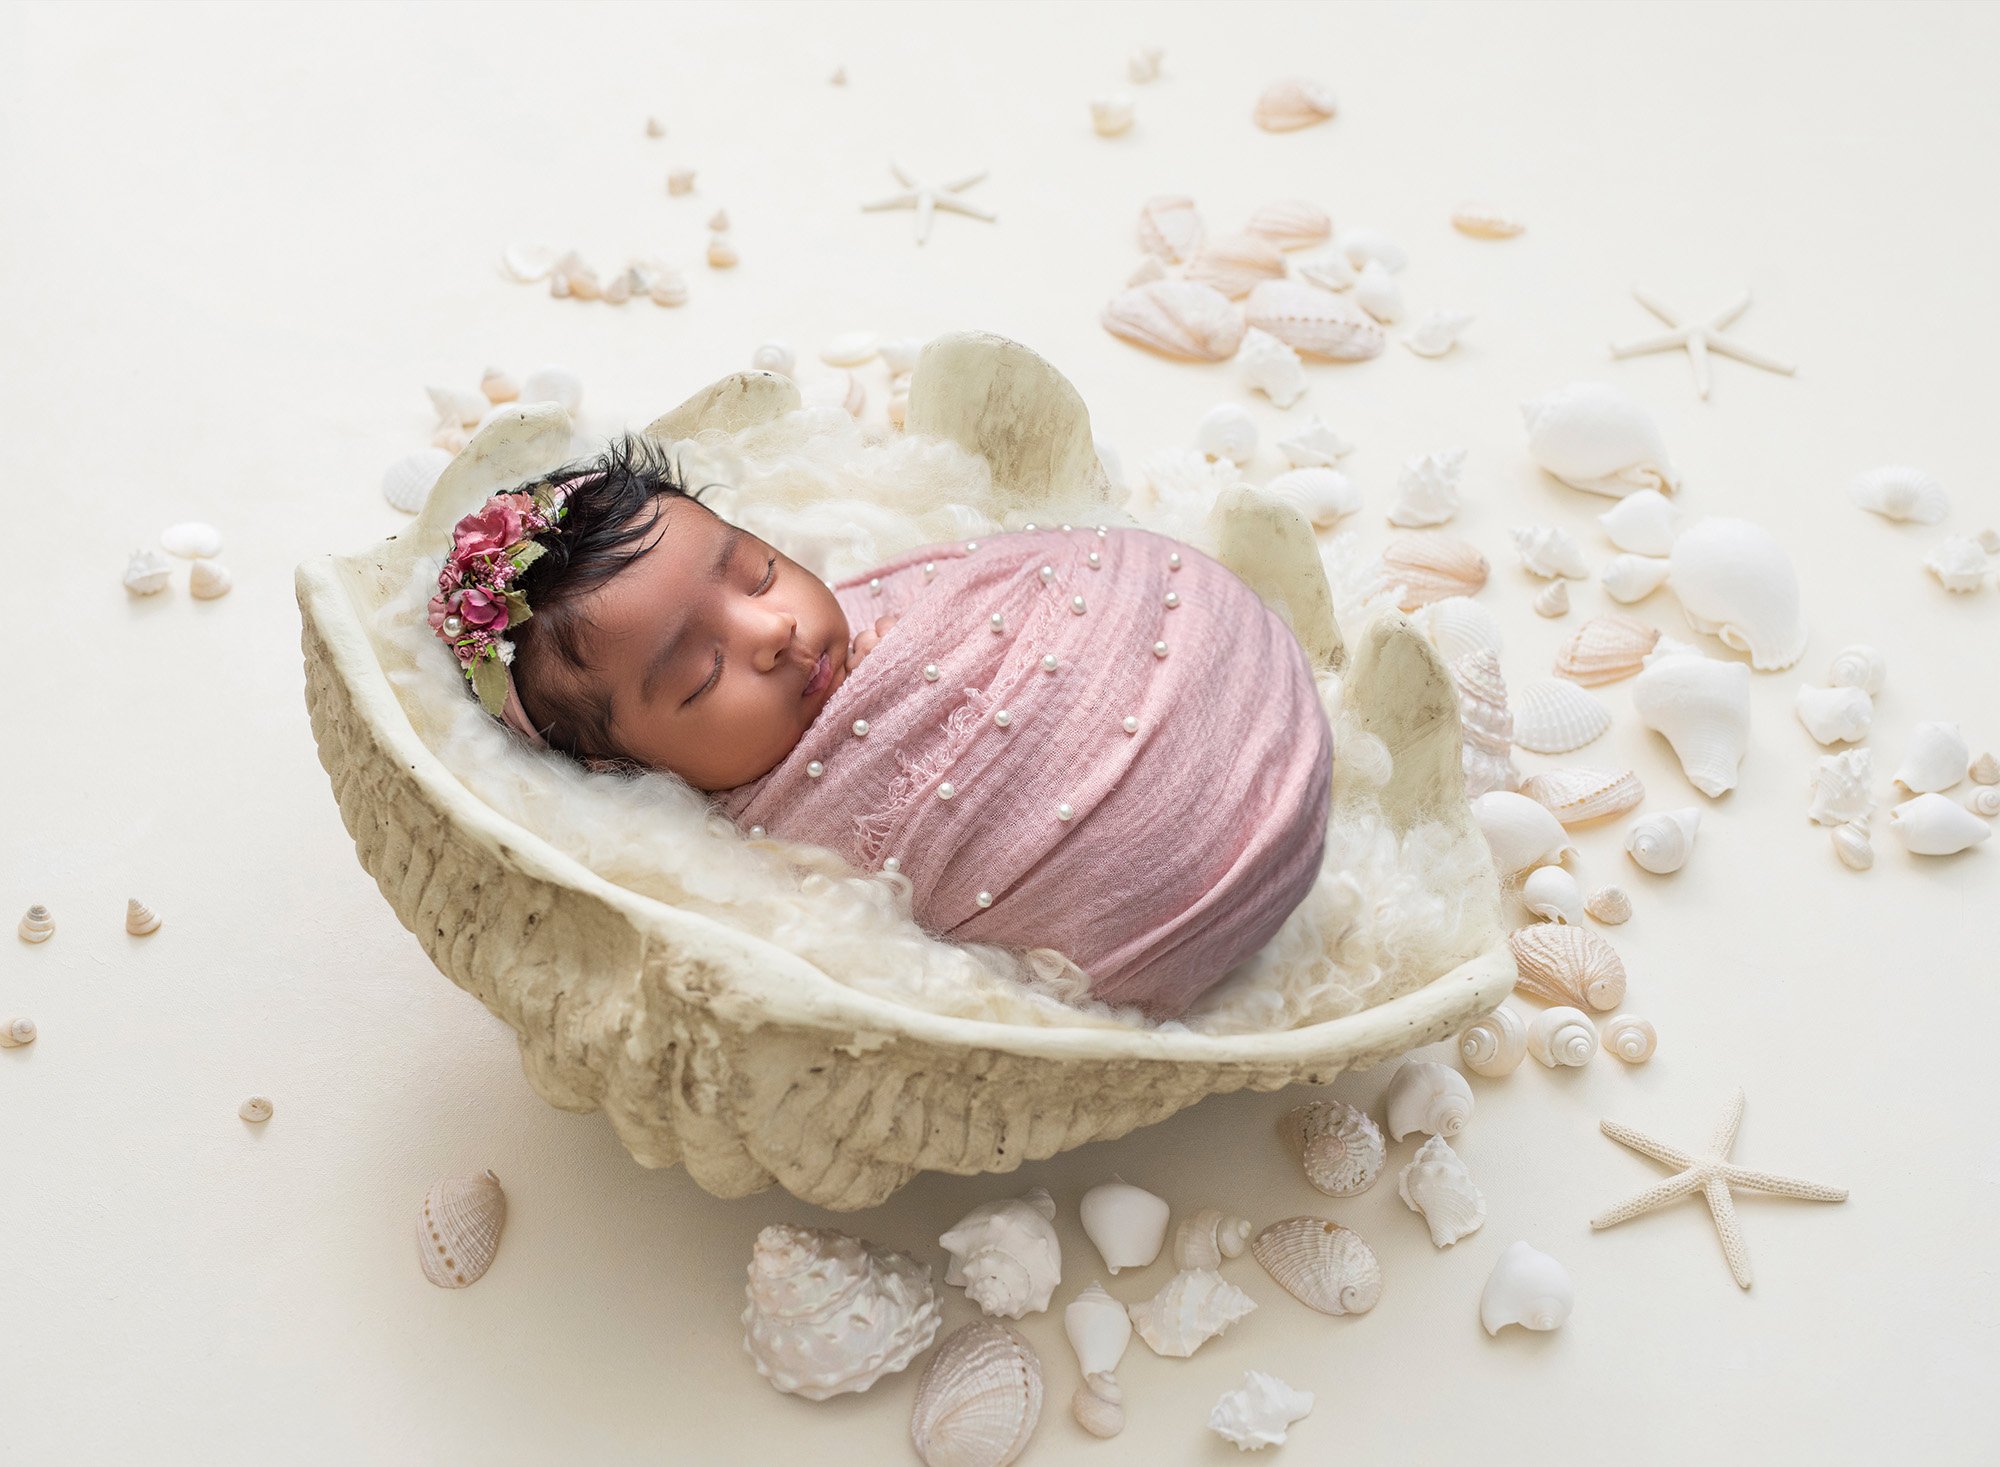 Newborn Girl Photography newborn baby girl swaddled in pink blanket of pearls sleeping inside large beach shell surrounded by miniature shells and starfish